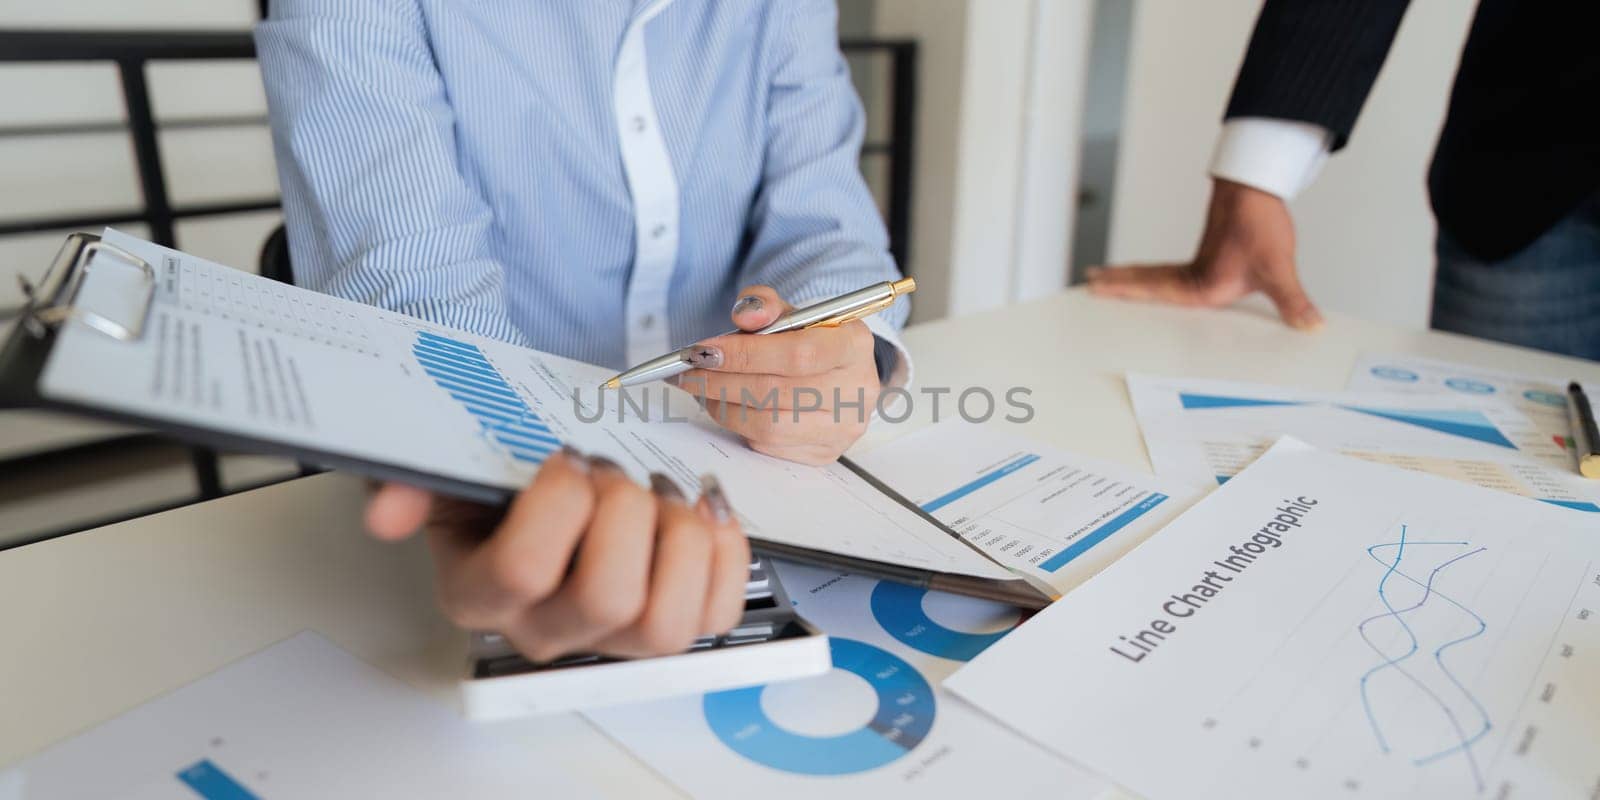 Business team analyzes financial business finance reports on laptop and graph documents during corporate meeting discussion showing successful teamwork, business meeting ideas.